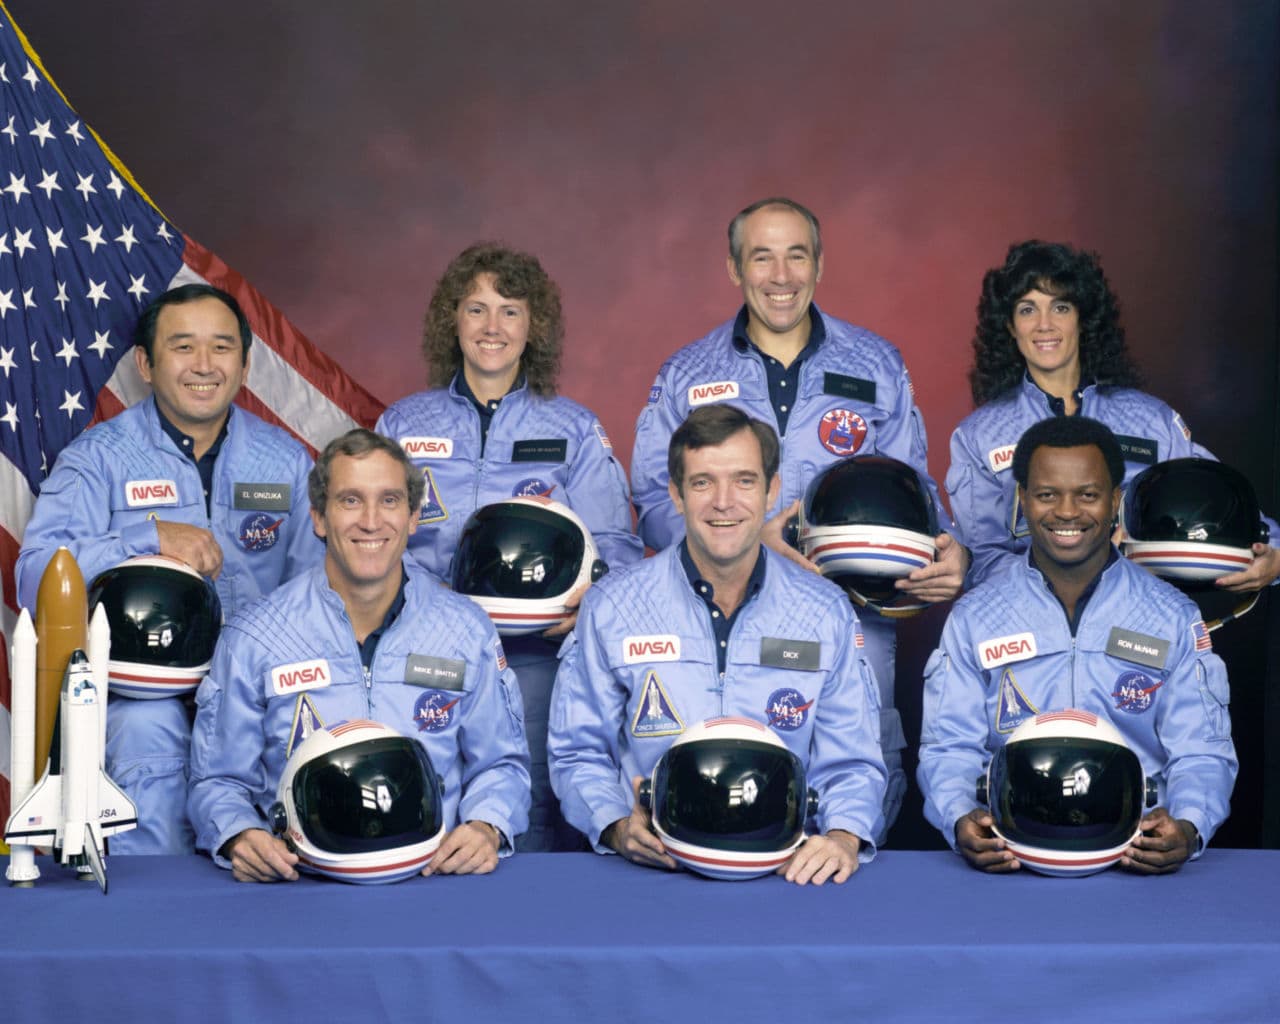 From front left, the crew members who died: pilot Michael J. Smith, commander Francis R. (Dick) Scobee, and mission specialist Ronald E. McNair. From rear left: mission specialist Ellison Onizuka, teacher Christa McAuliffe, payload specialist Gregory Jarvis, and mission specialist Judith Resnik. (NASA, via AP)